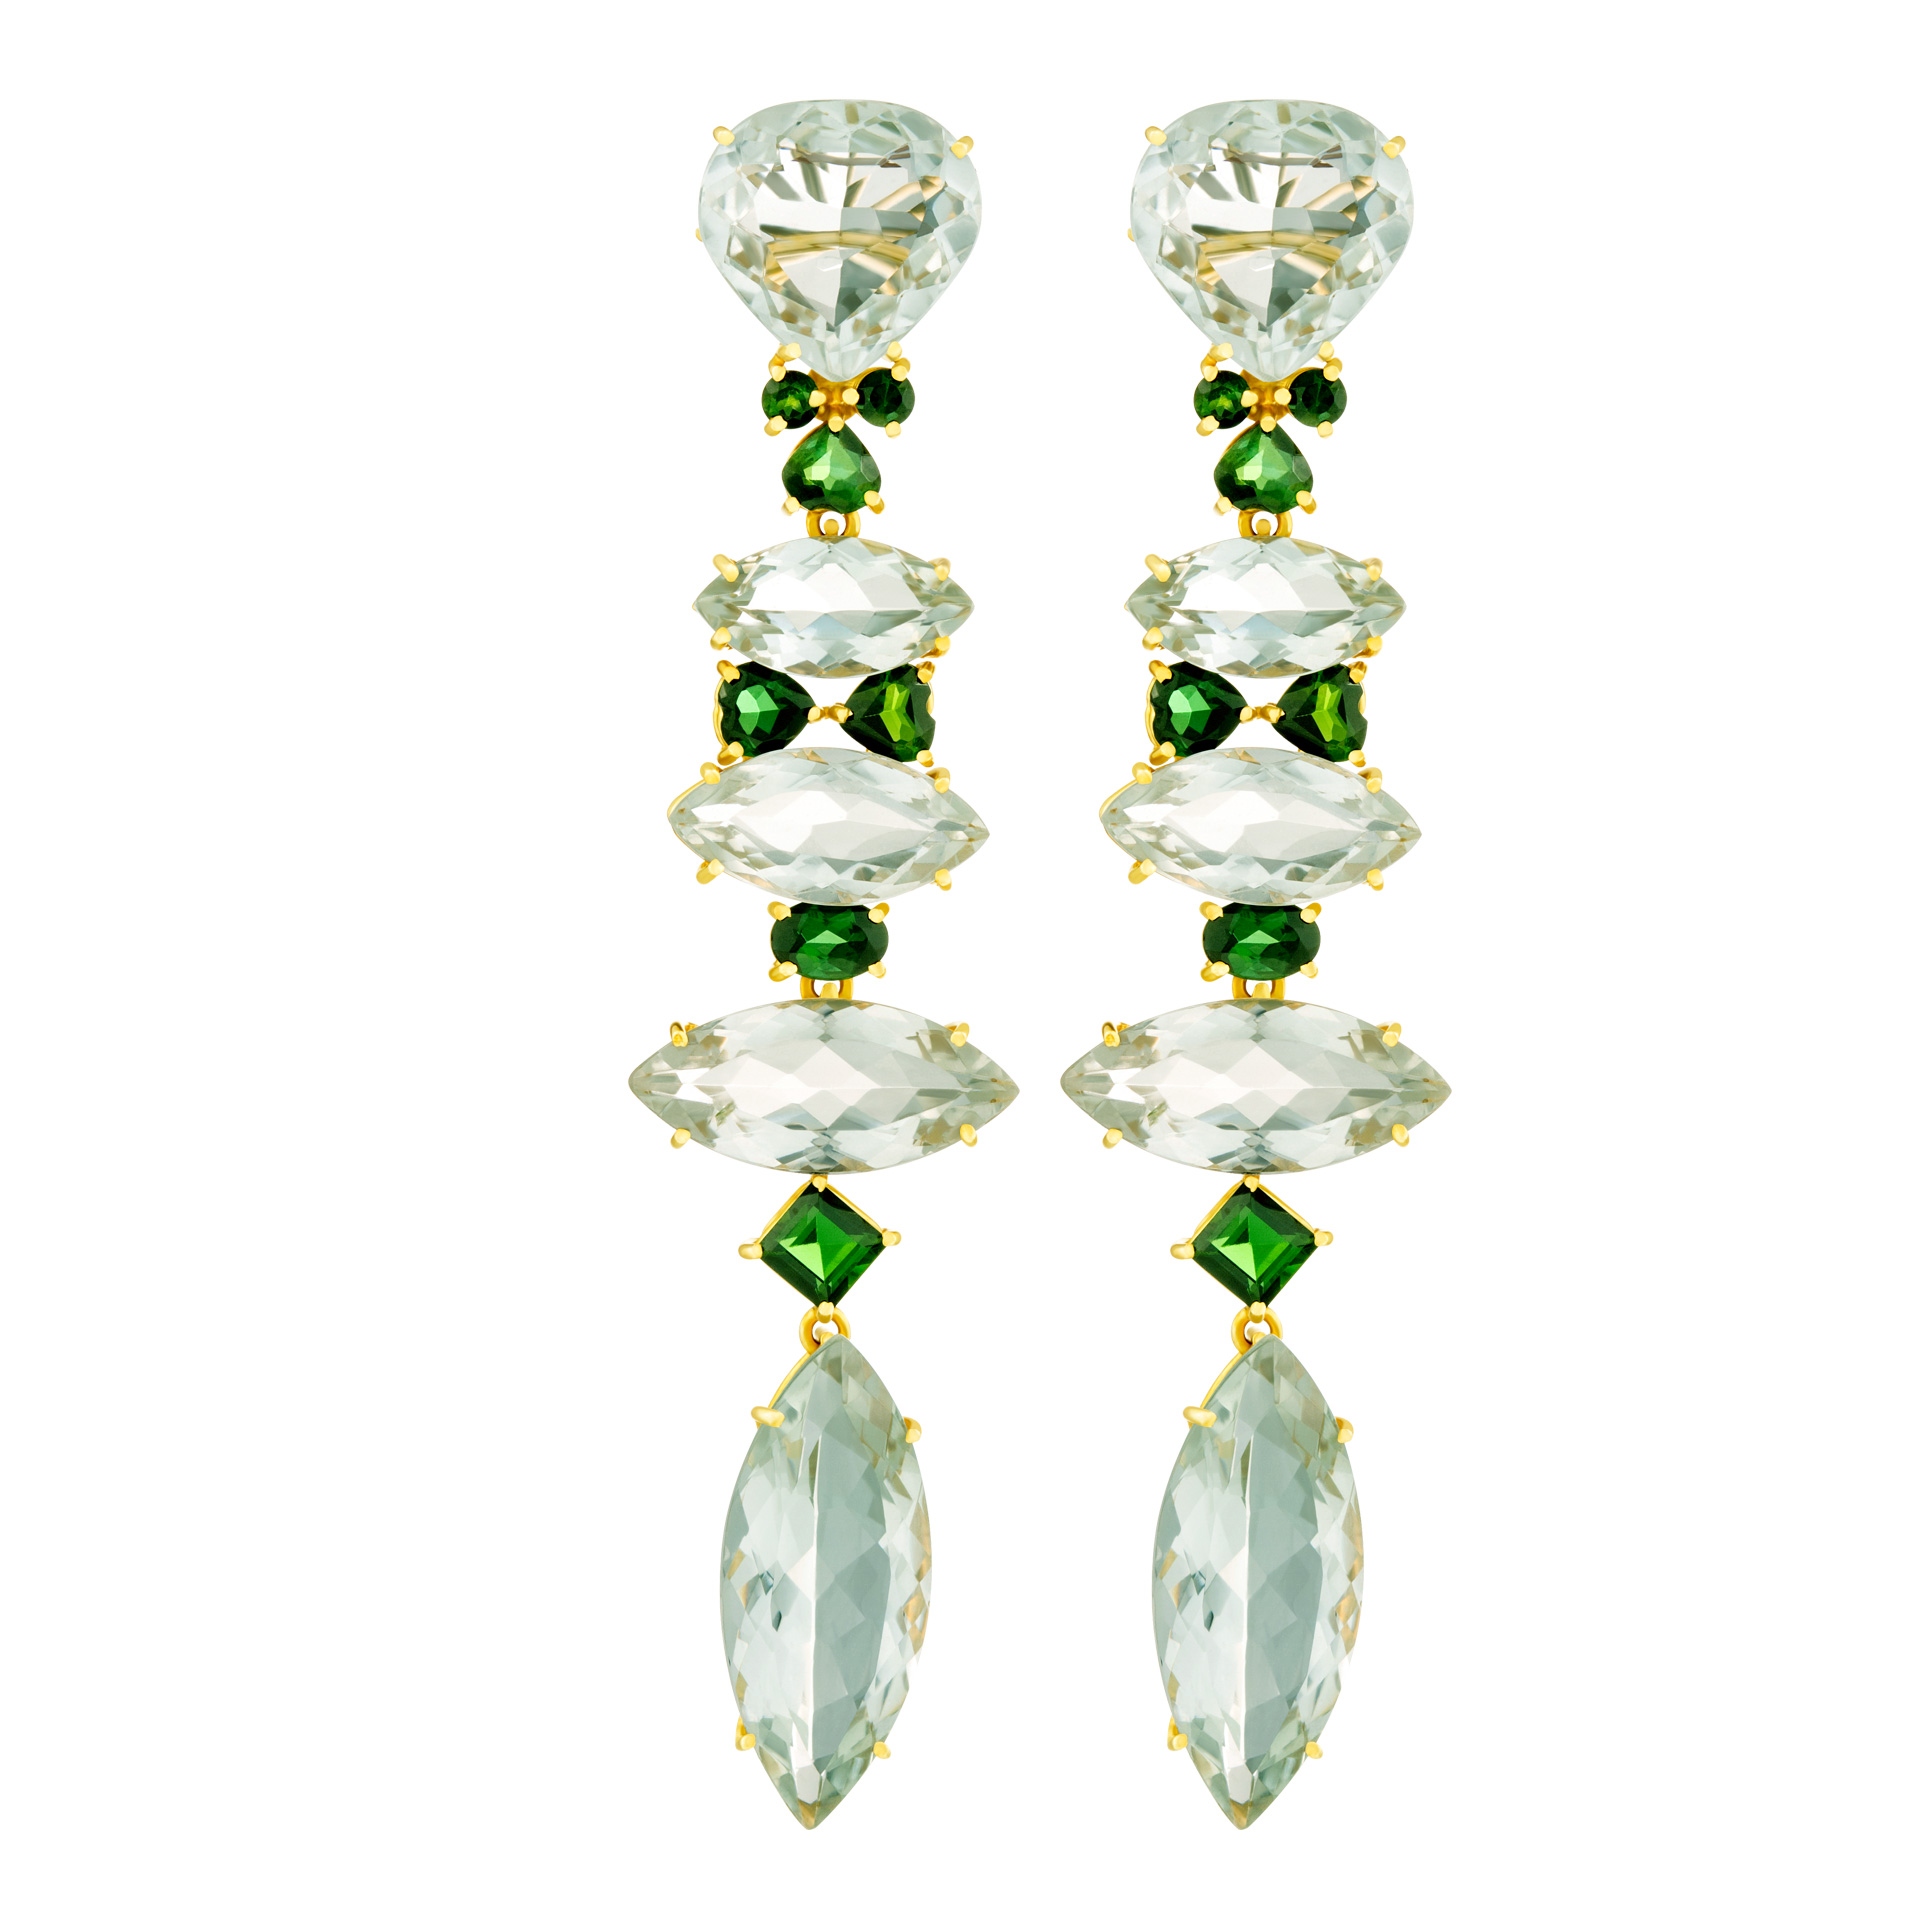  Green tourmaline and topaz earrings in 18k gold.